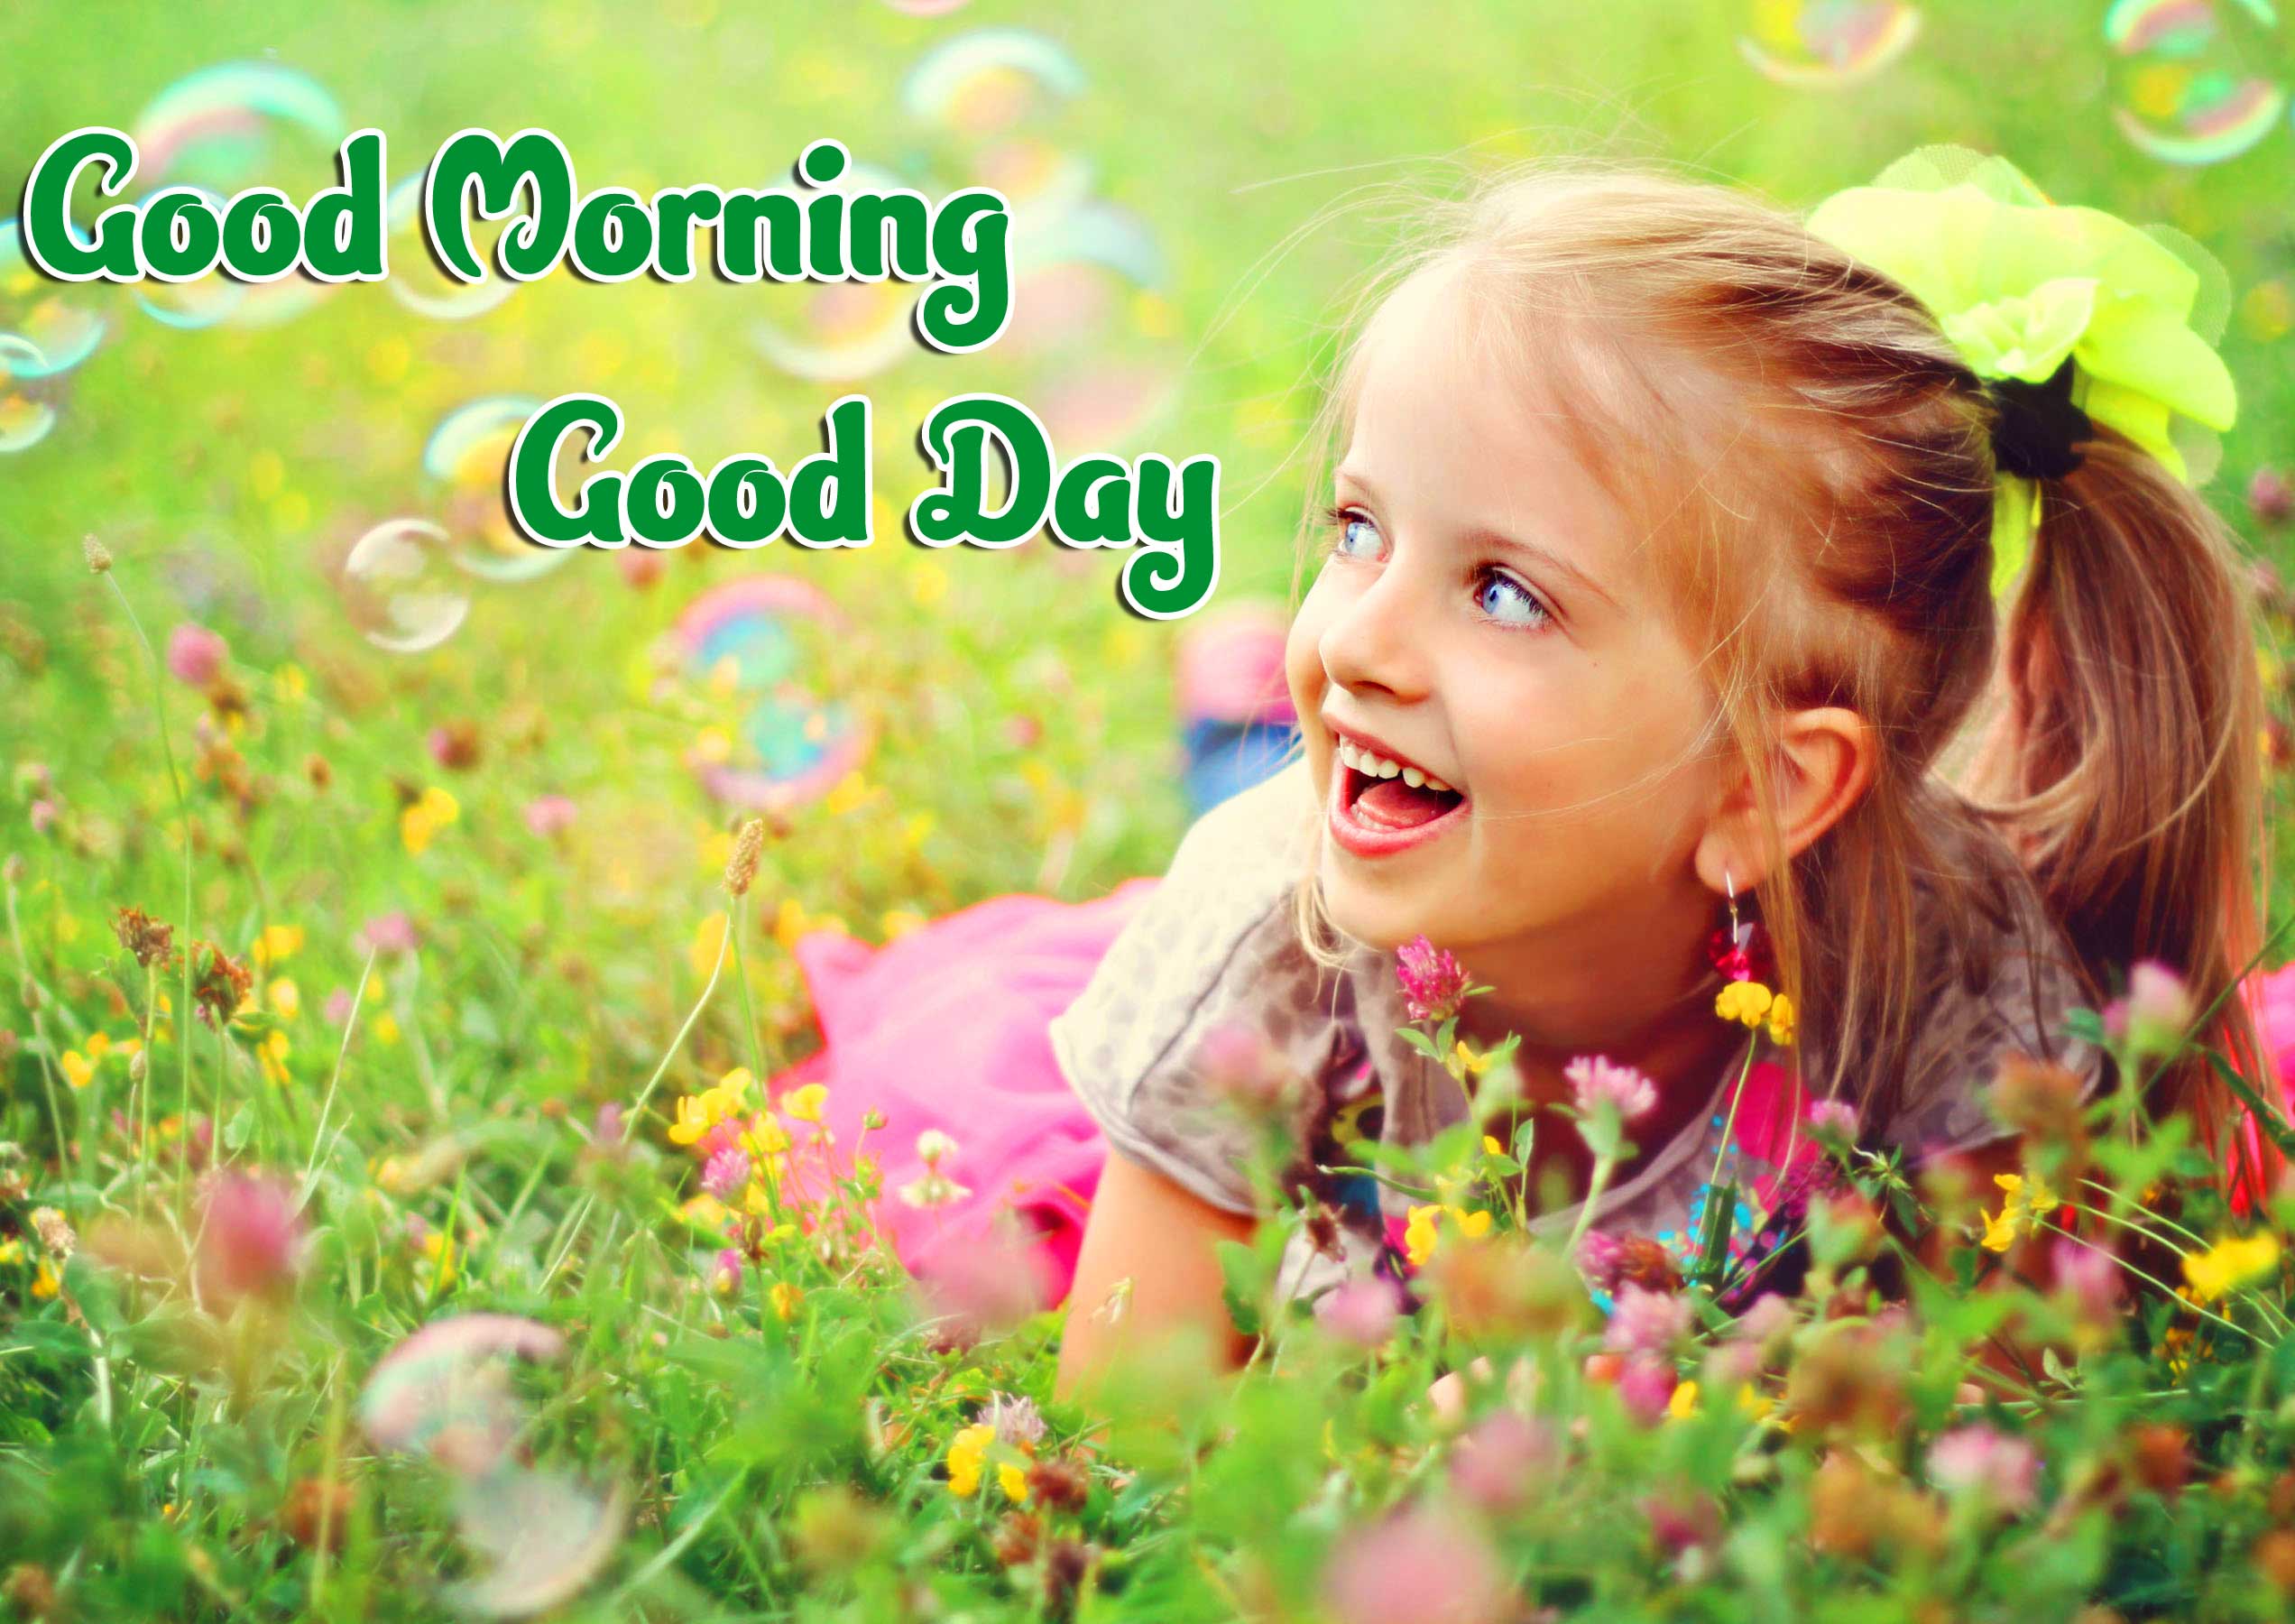 Best Good Morning Images pics Download for Whatsapp